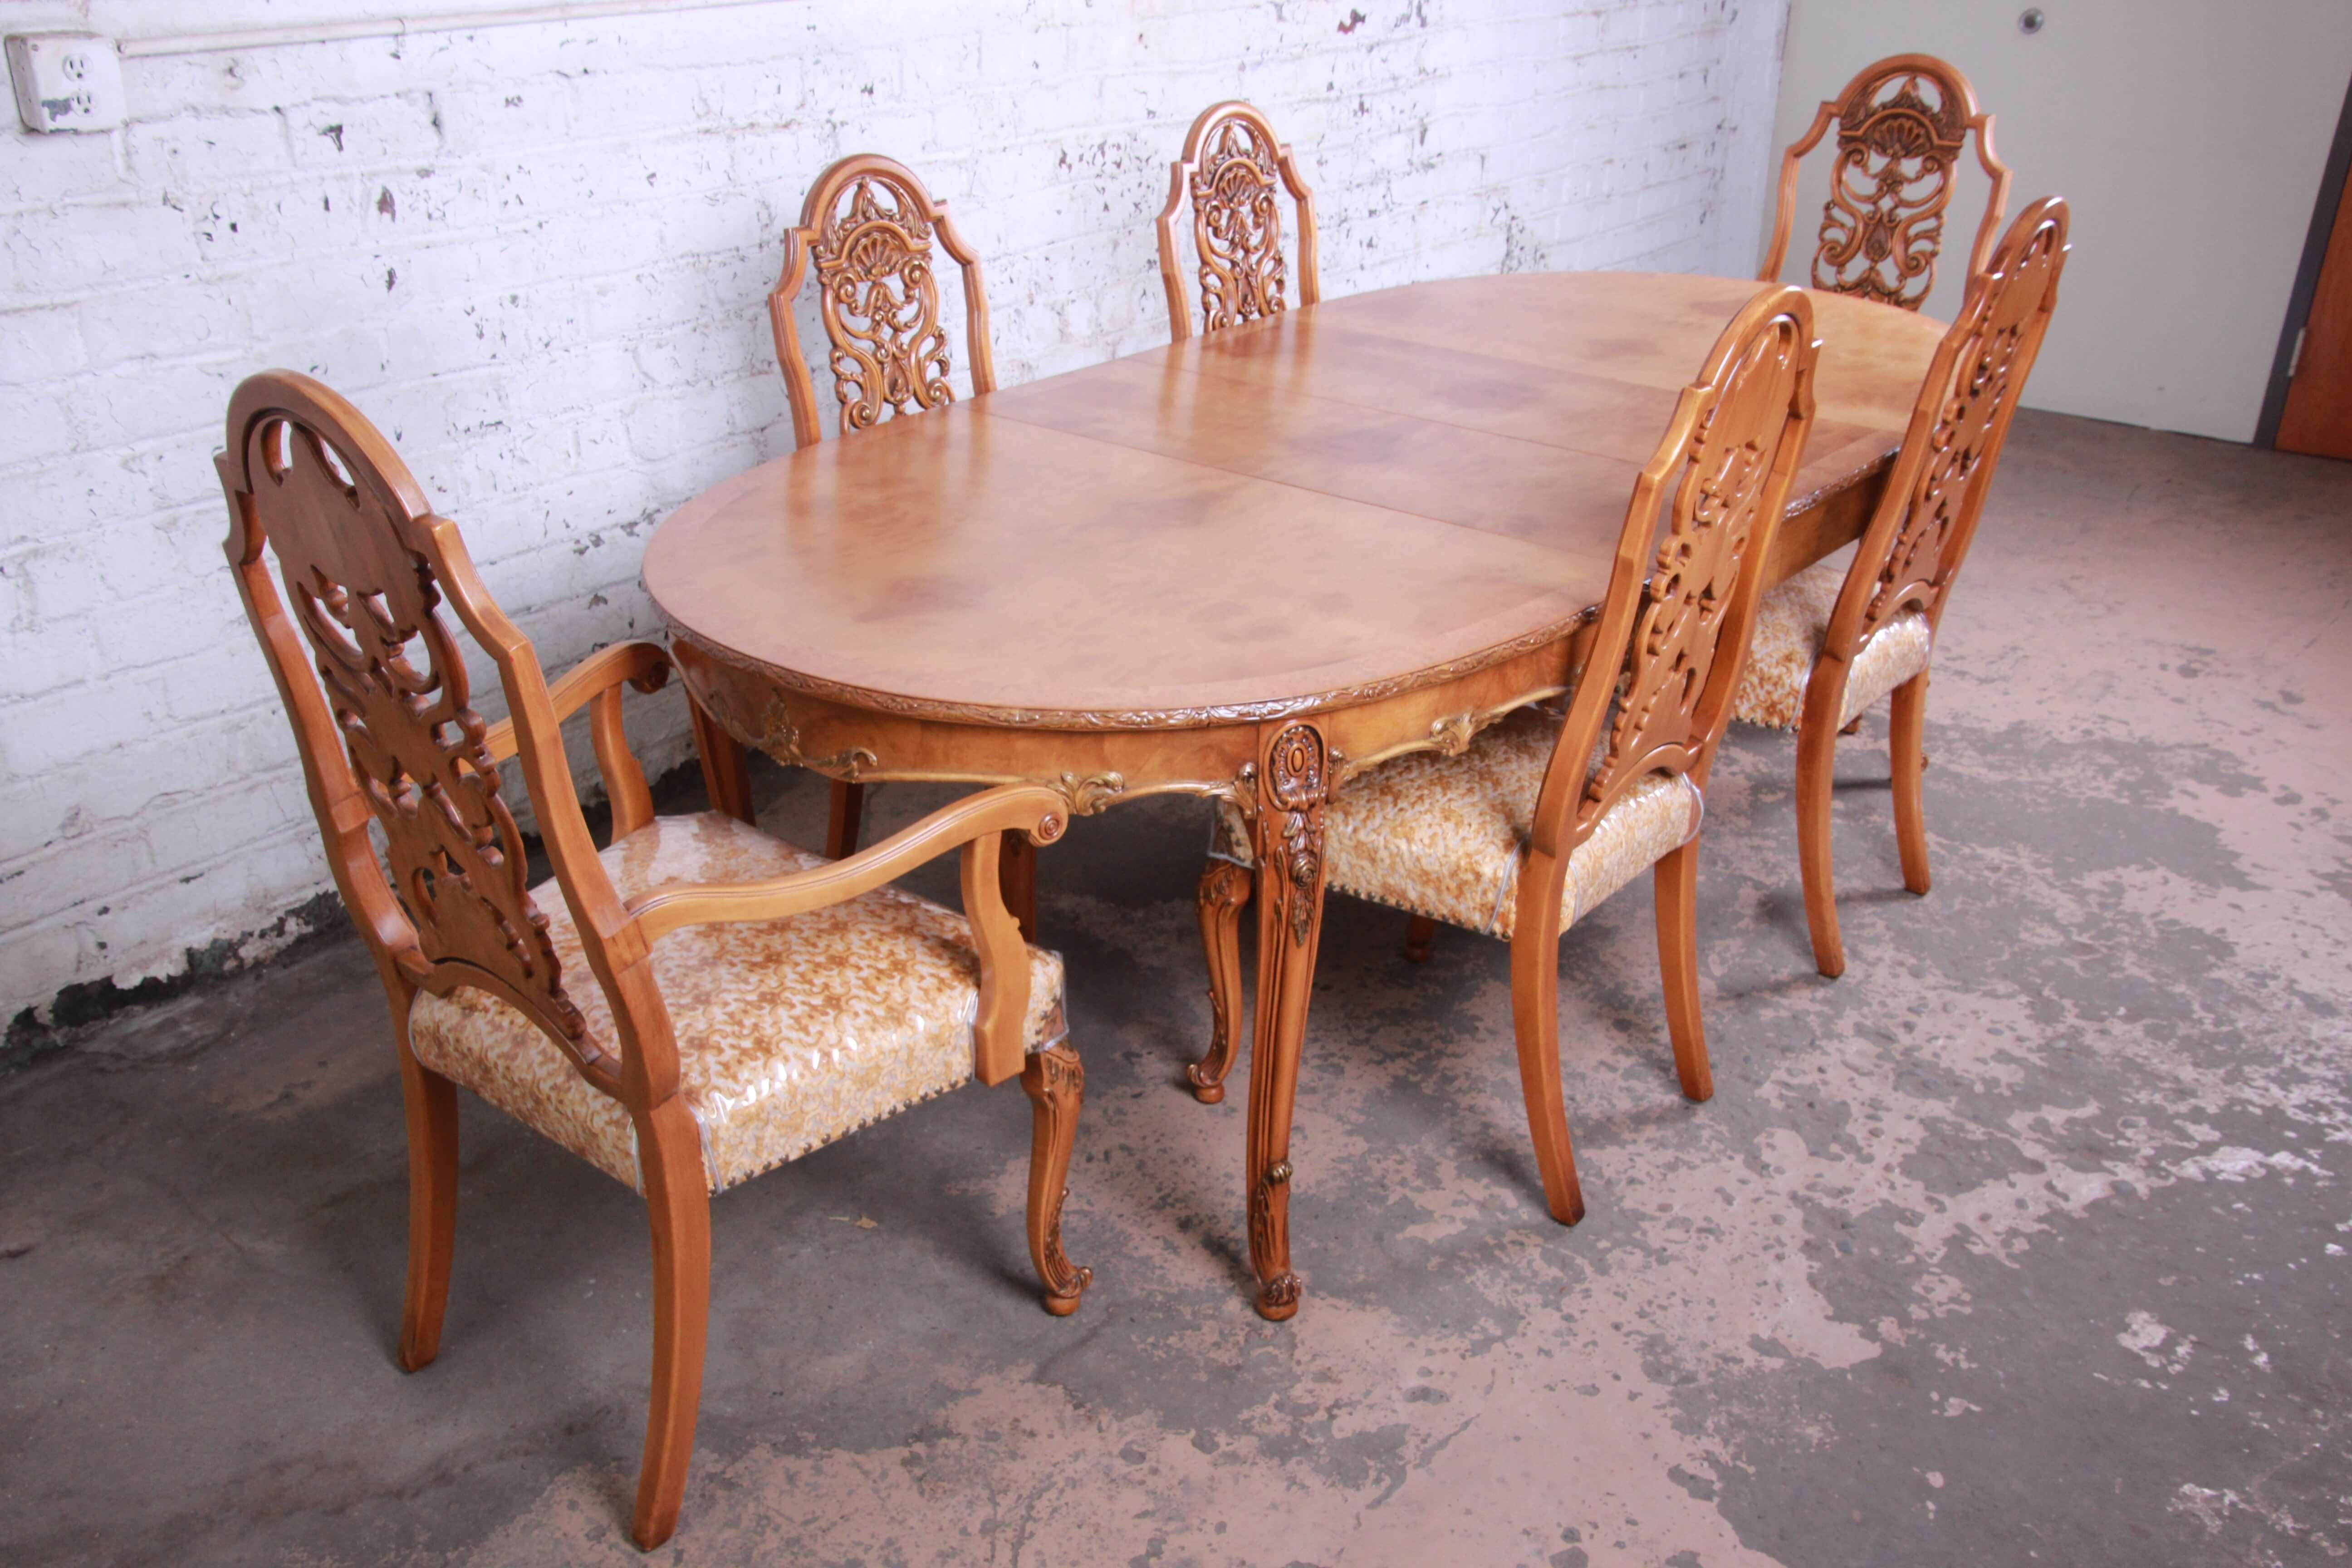 Offering a stunning ornate burl wood French carved dining table and six chairs by Romweber. This newly refinished table has a banded edge and expertly bookmatched burl wood top leaving it the focal point of any important elegant space. The table has